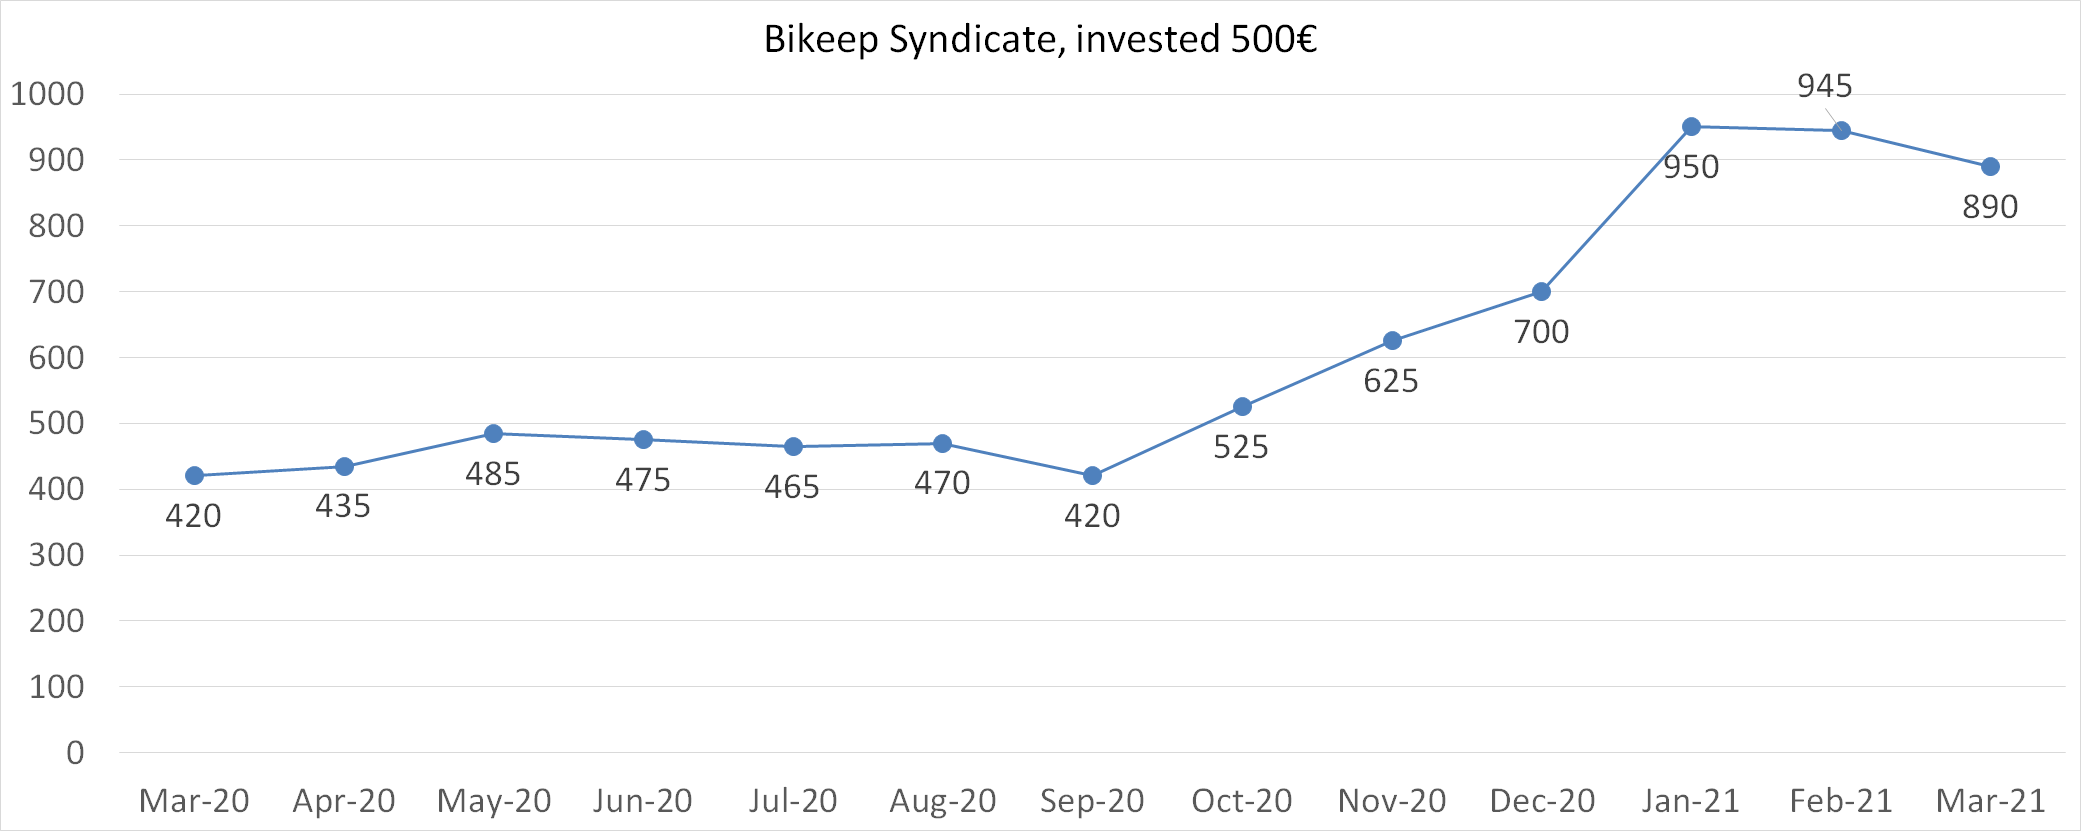 Bikeep syndicate, total 500 invested, march 2021